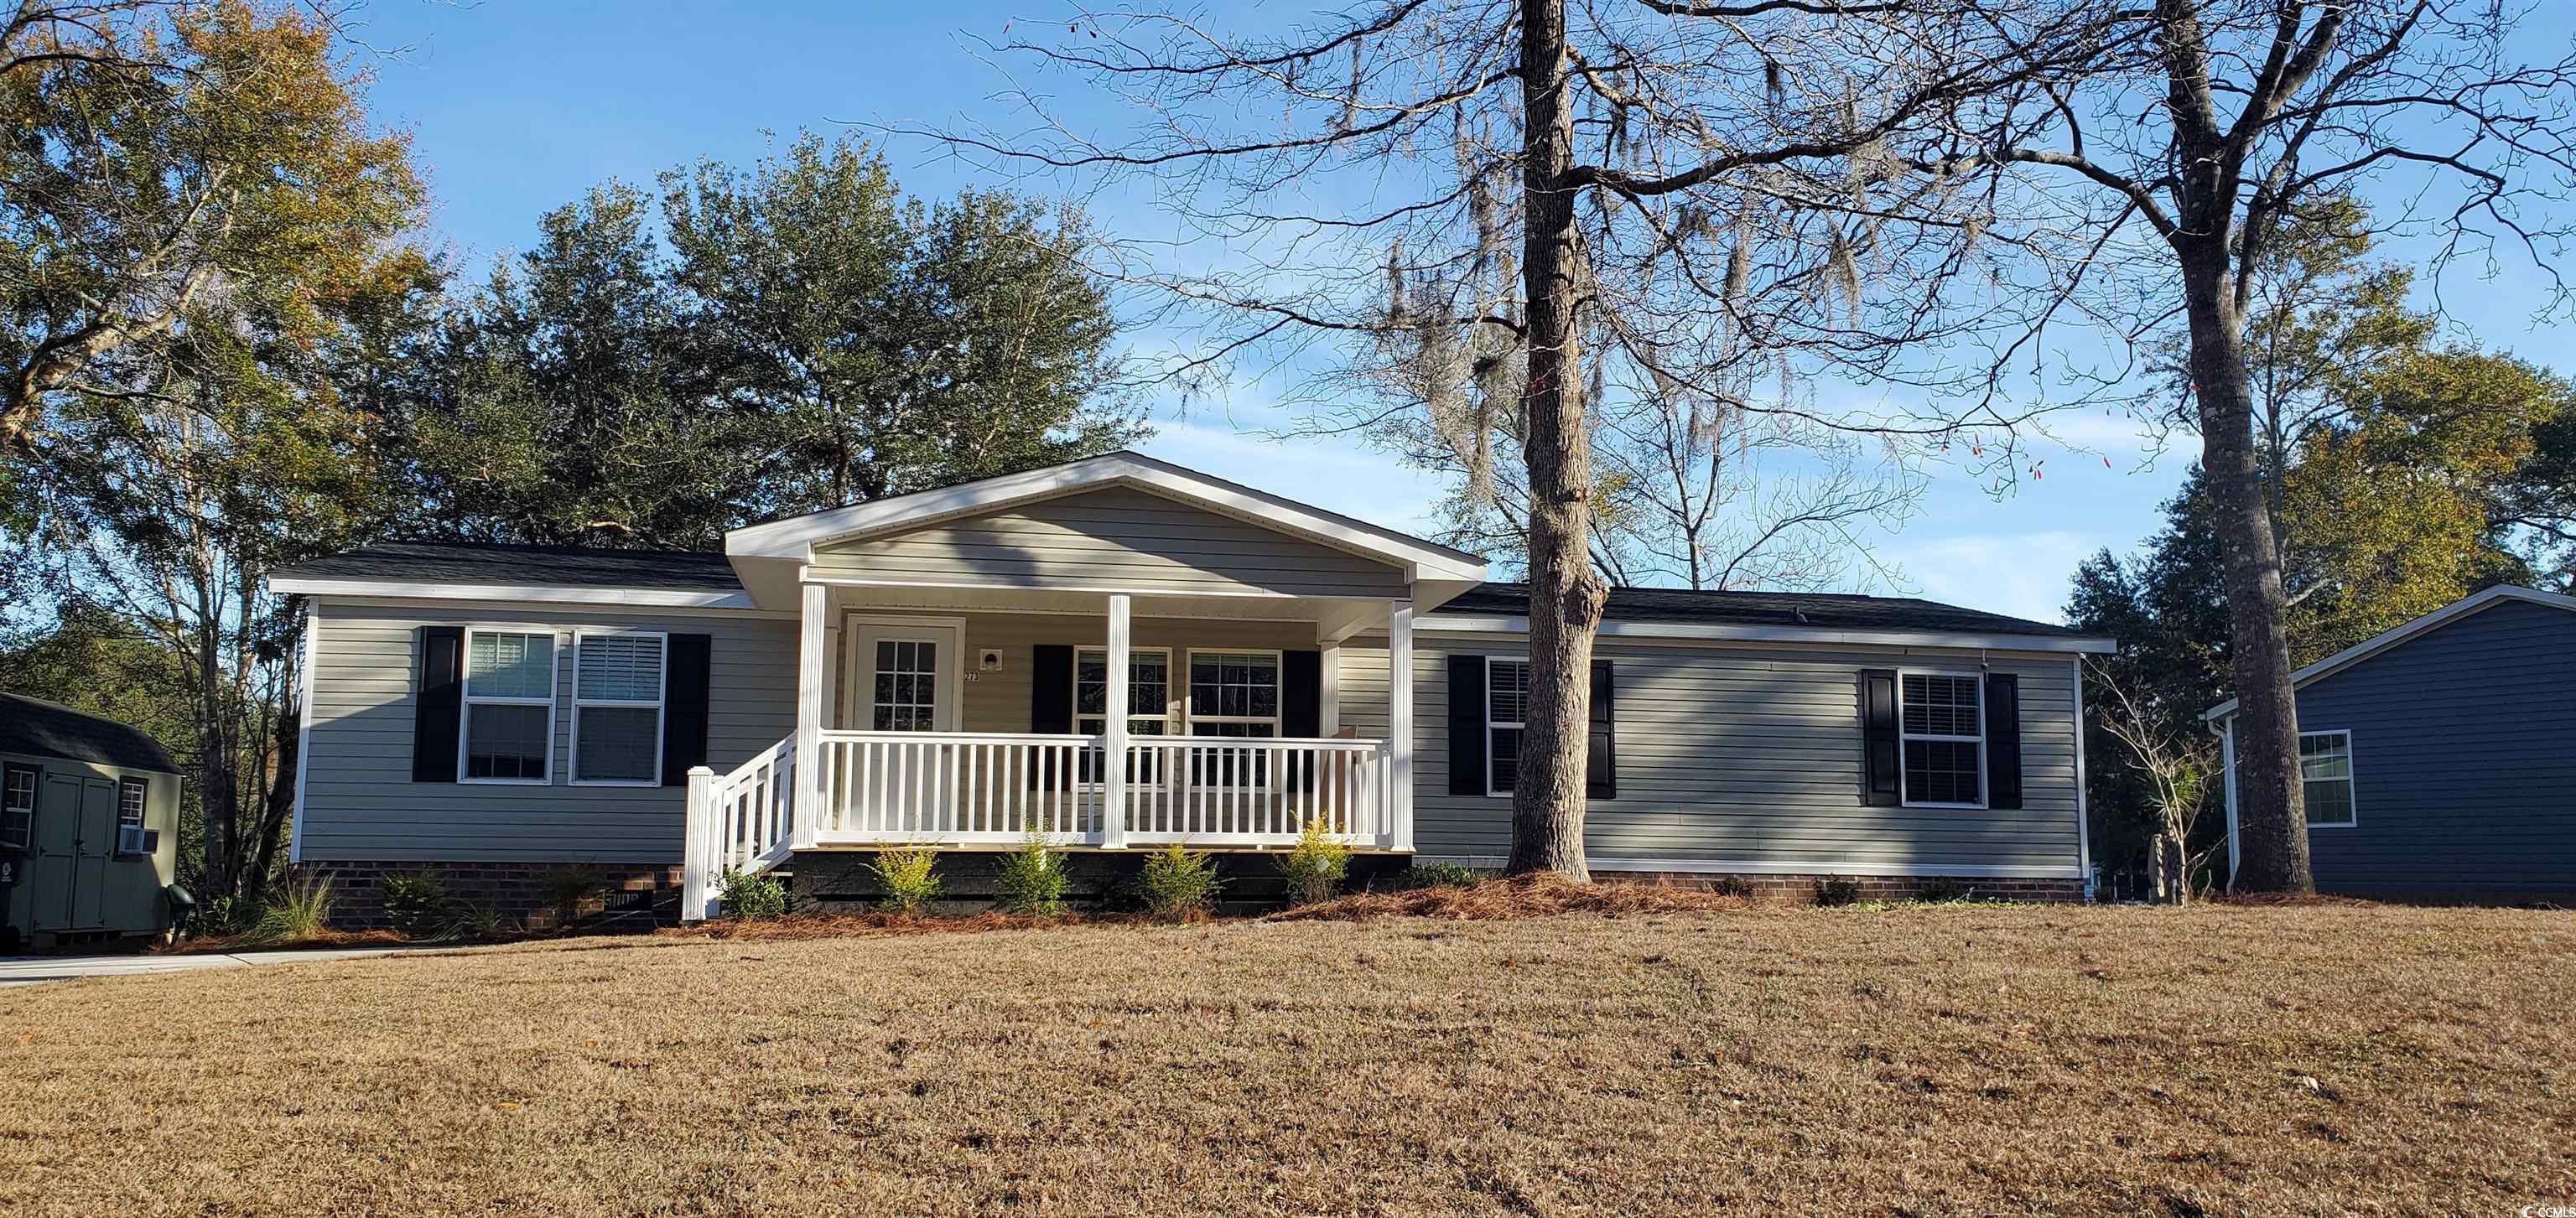 this completely renovated 4 br/2 ba home sits on a large lake with a fantastic view. stainless appliances with granite counters and backsplash, large work island, new lvp flooring, new roof, new hwh and freshly painted throughout. 19x11 front porch and 20x11 back porch. detached 20x11 storage building also on lot. new owners must be approved by the park. this home sits on a leased lot where you only pay the lot rent and no taxes on the land. no rentals allowed in hawks nest, must be a second home or permanent home. limit 2 pets. you are only 2.5 miles to the famous murrells inlet marshwalk (the seafood capital of sc).less than 5 miles to the beach and ocean. intracoastal waterway with boat launch close by. other activities include fishing, golfing, shopping, brookgreengardens and the hospital is close by.